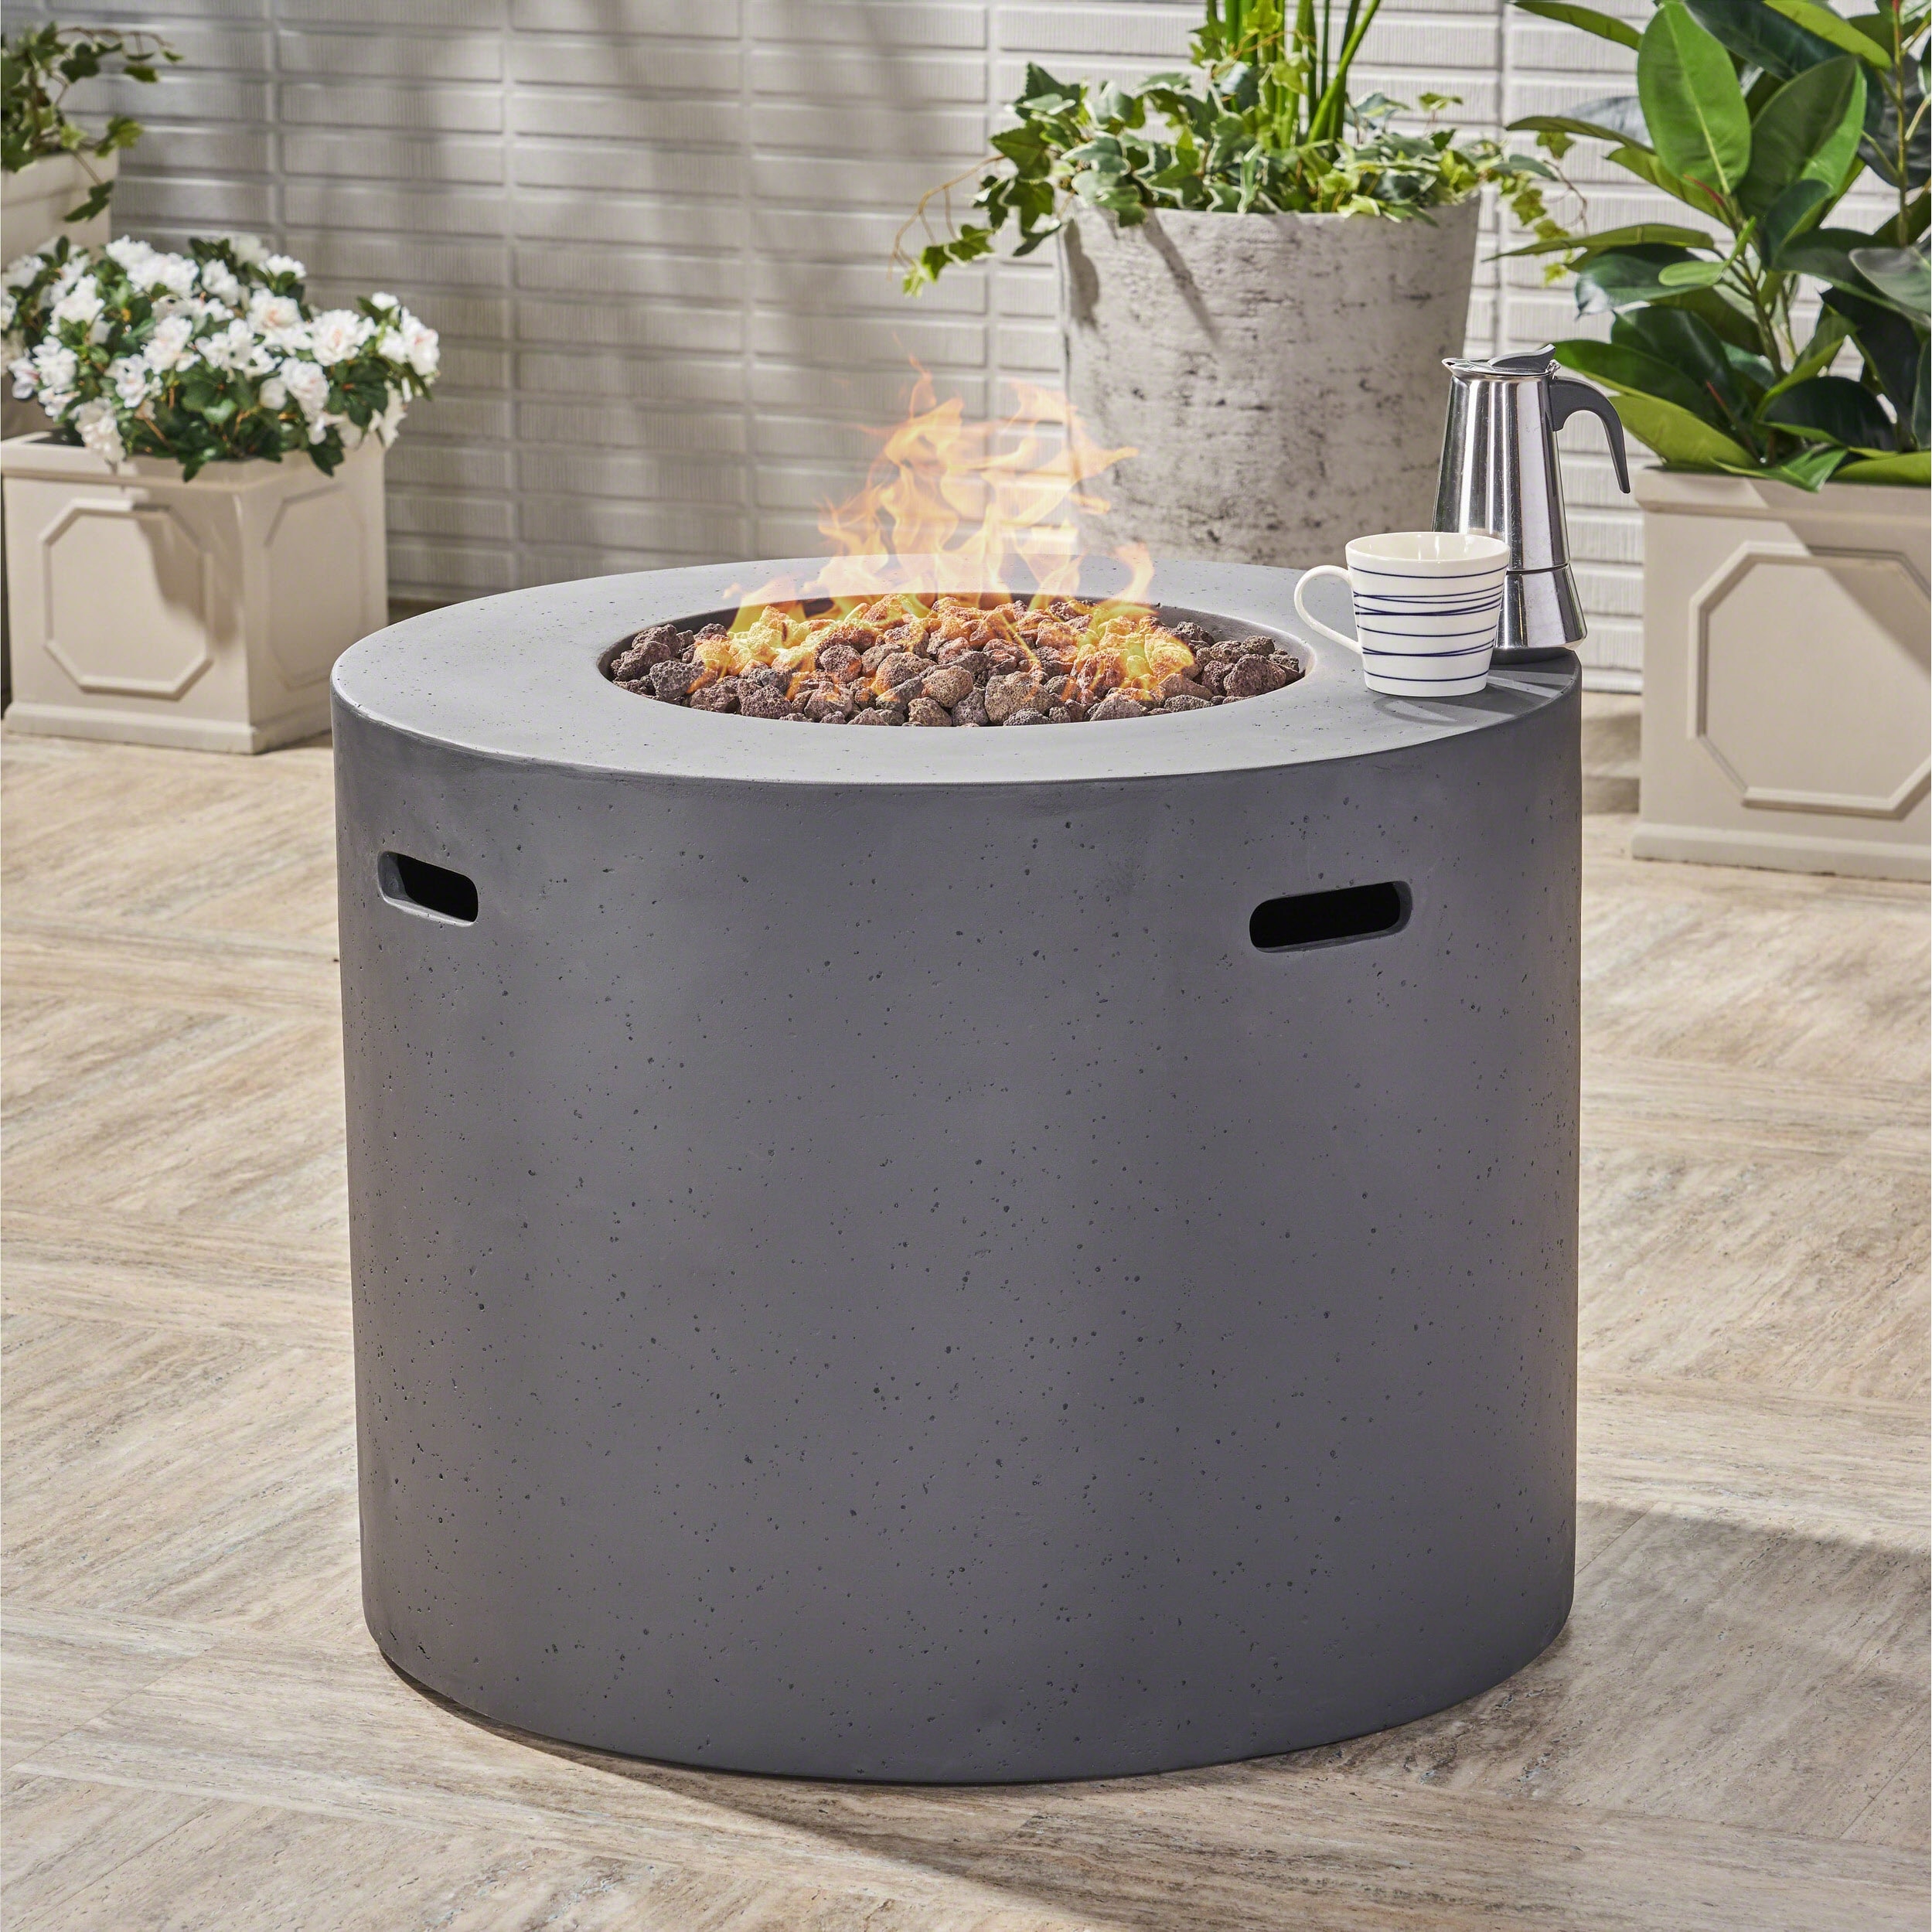 Aidan Circular Propane Fire Pit Table By Christopher Knight Home On Sale Overstock 22044406